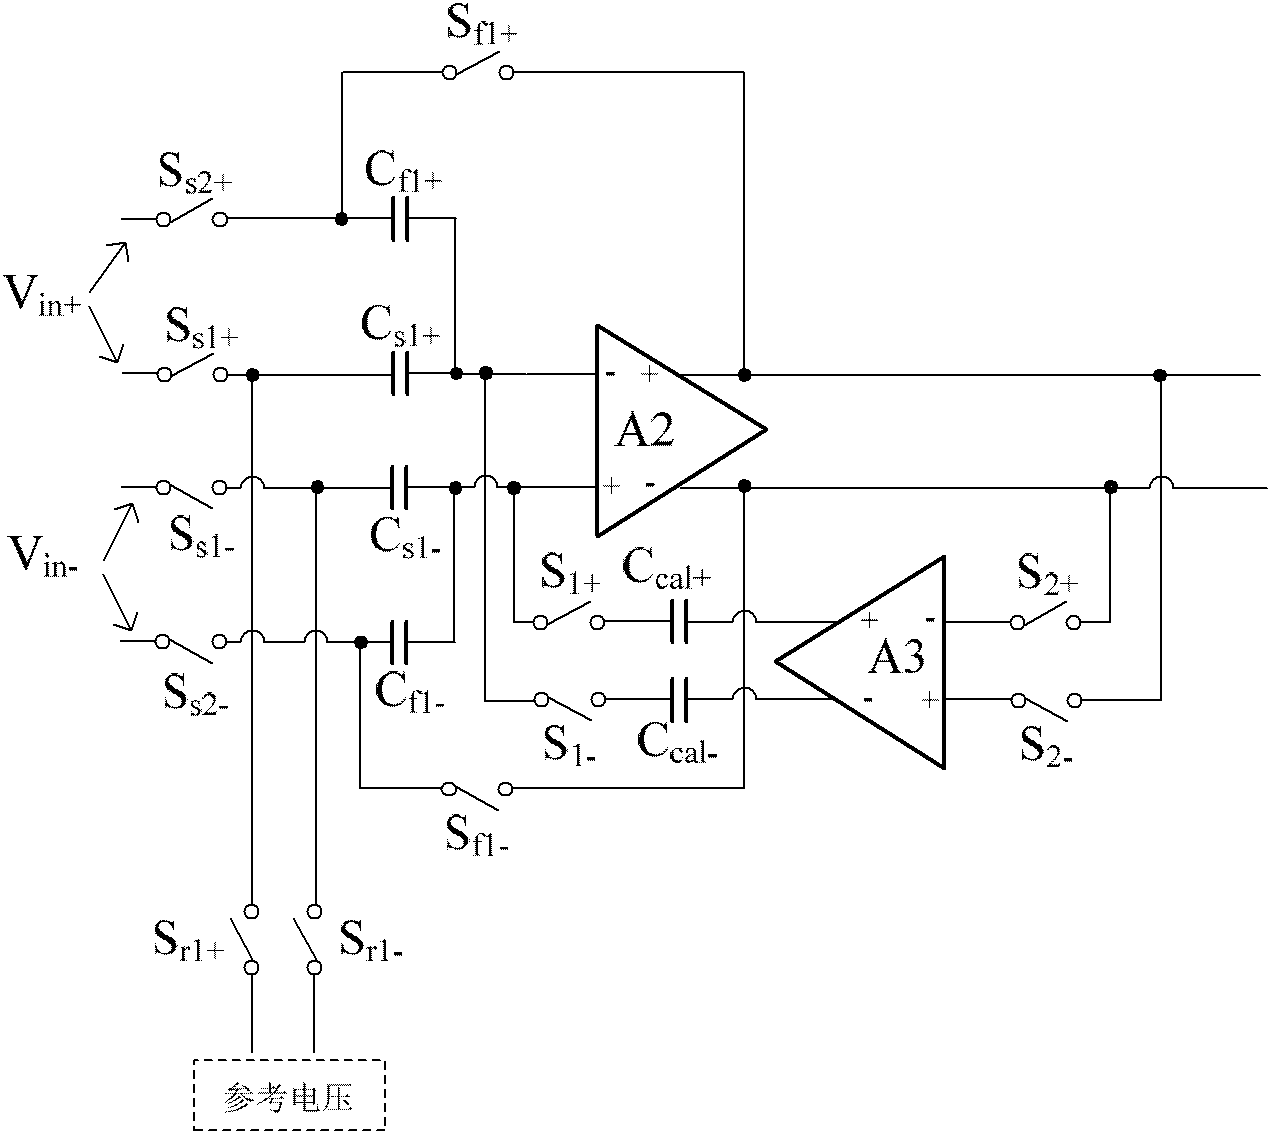 Multiplication-type A/D (Analog/Digital) converter capable of correcting limited gain error